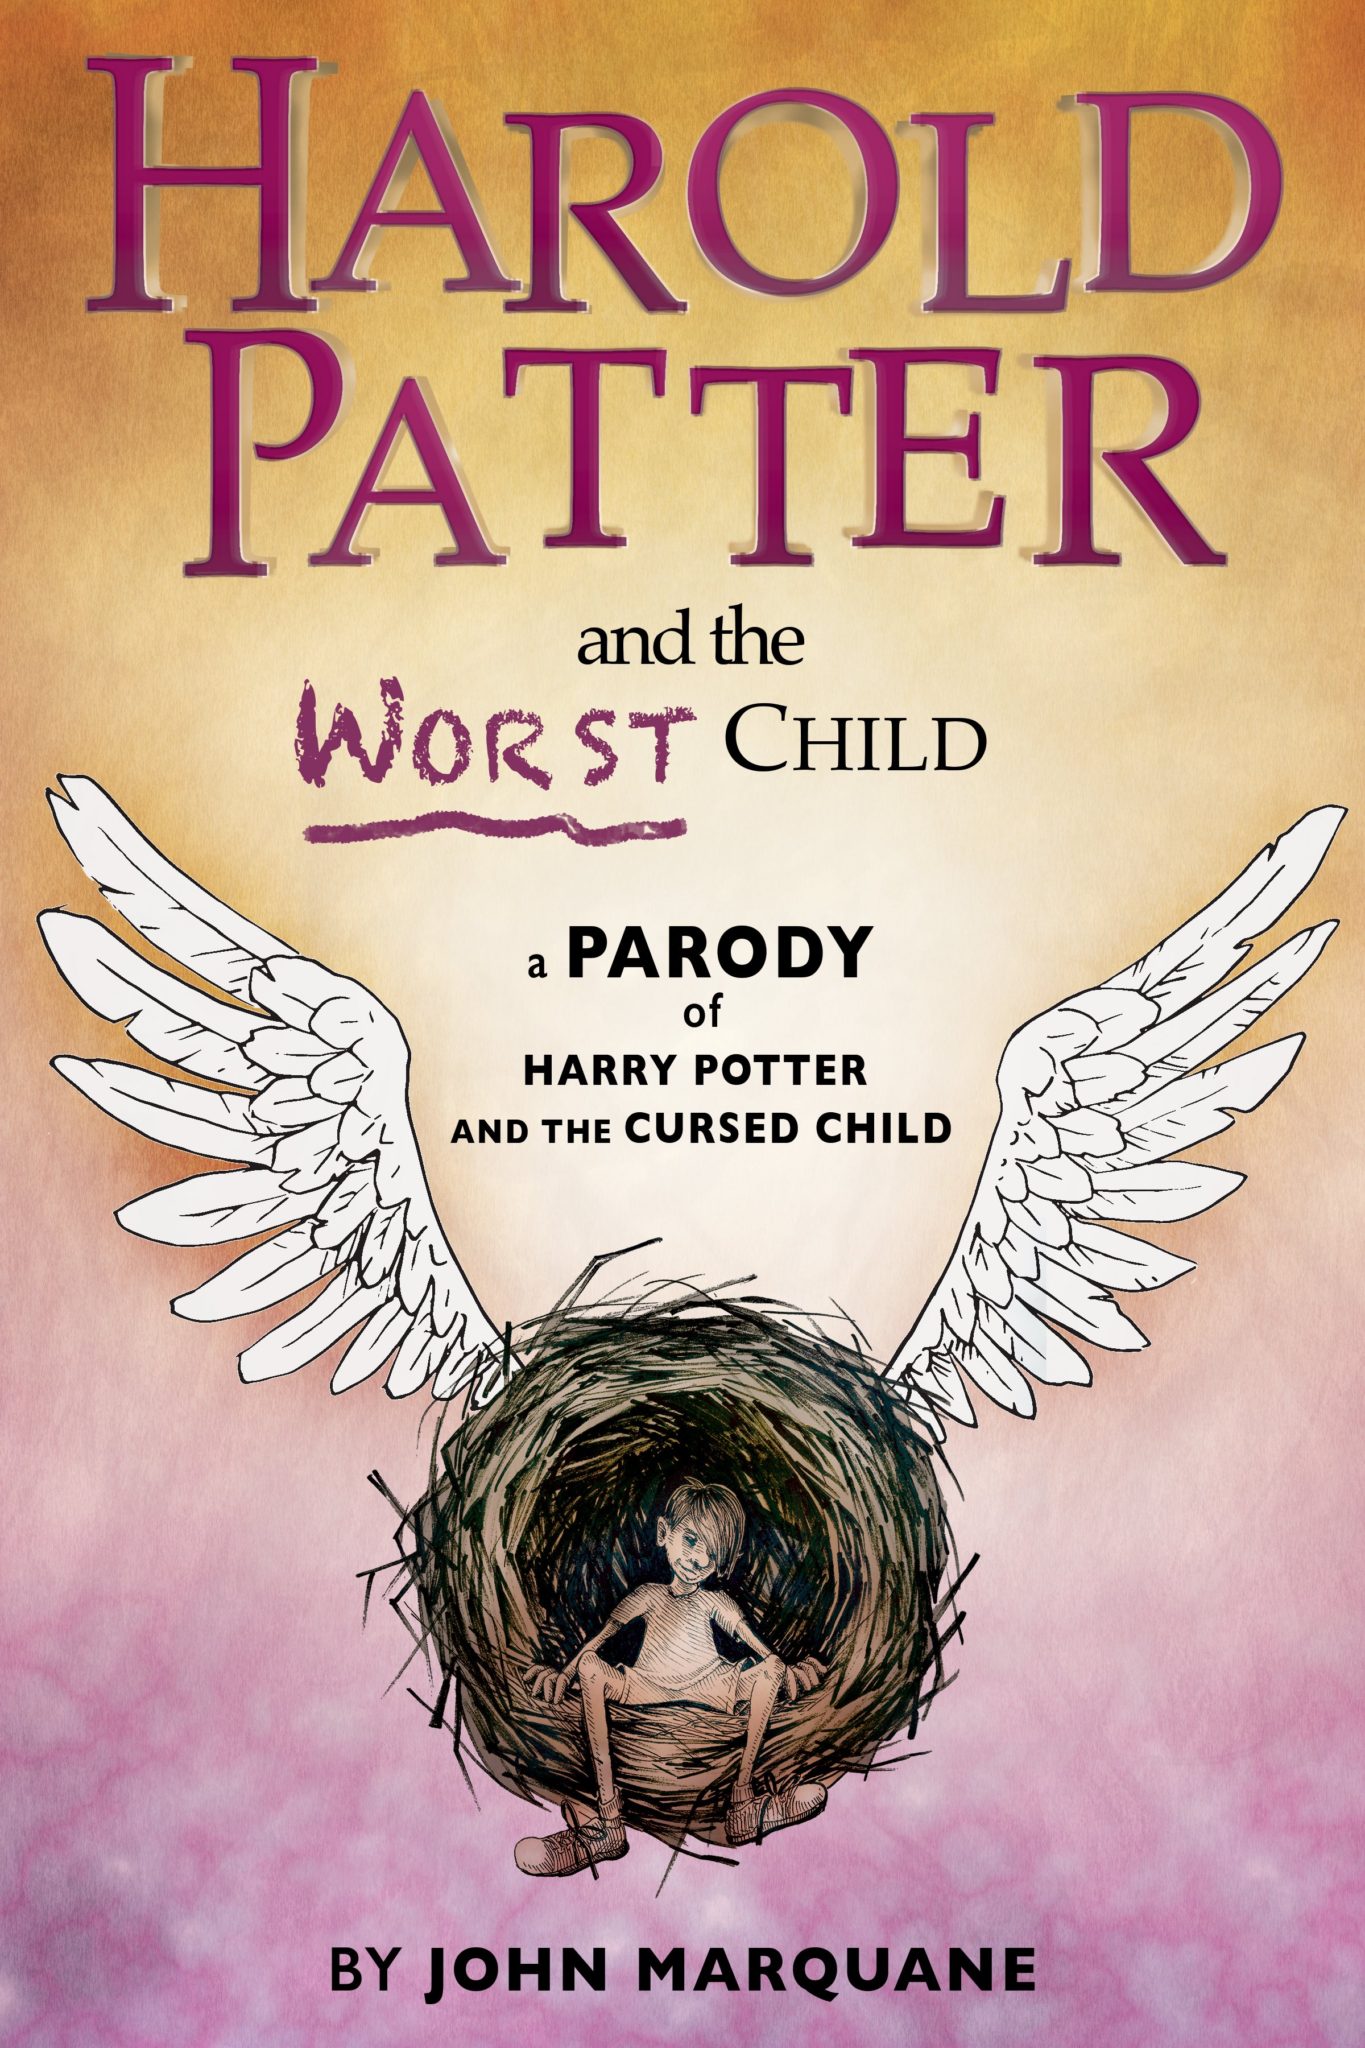 FREE: Harold Patter and the Worst Child by John Marquane